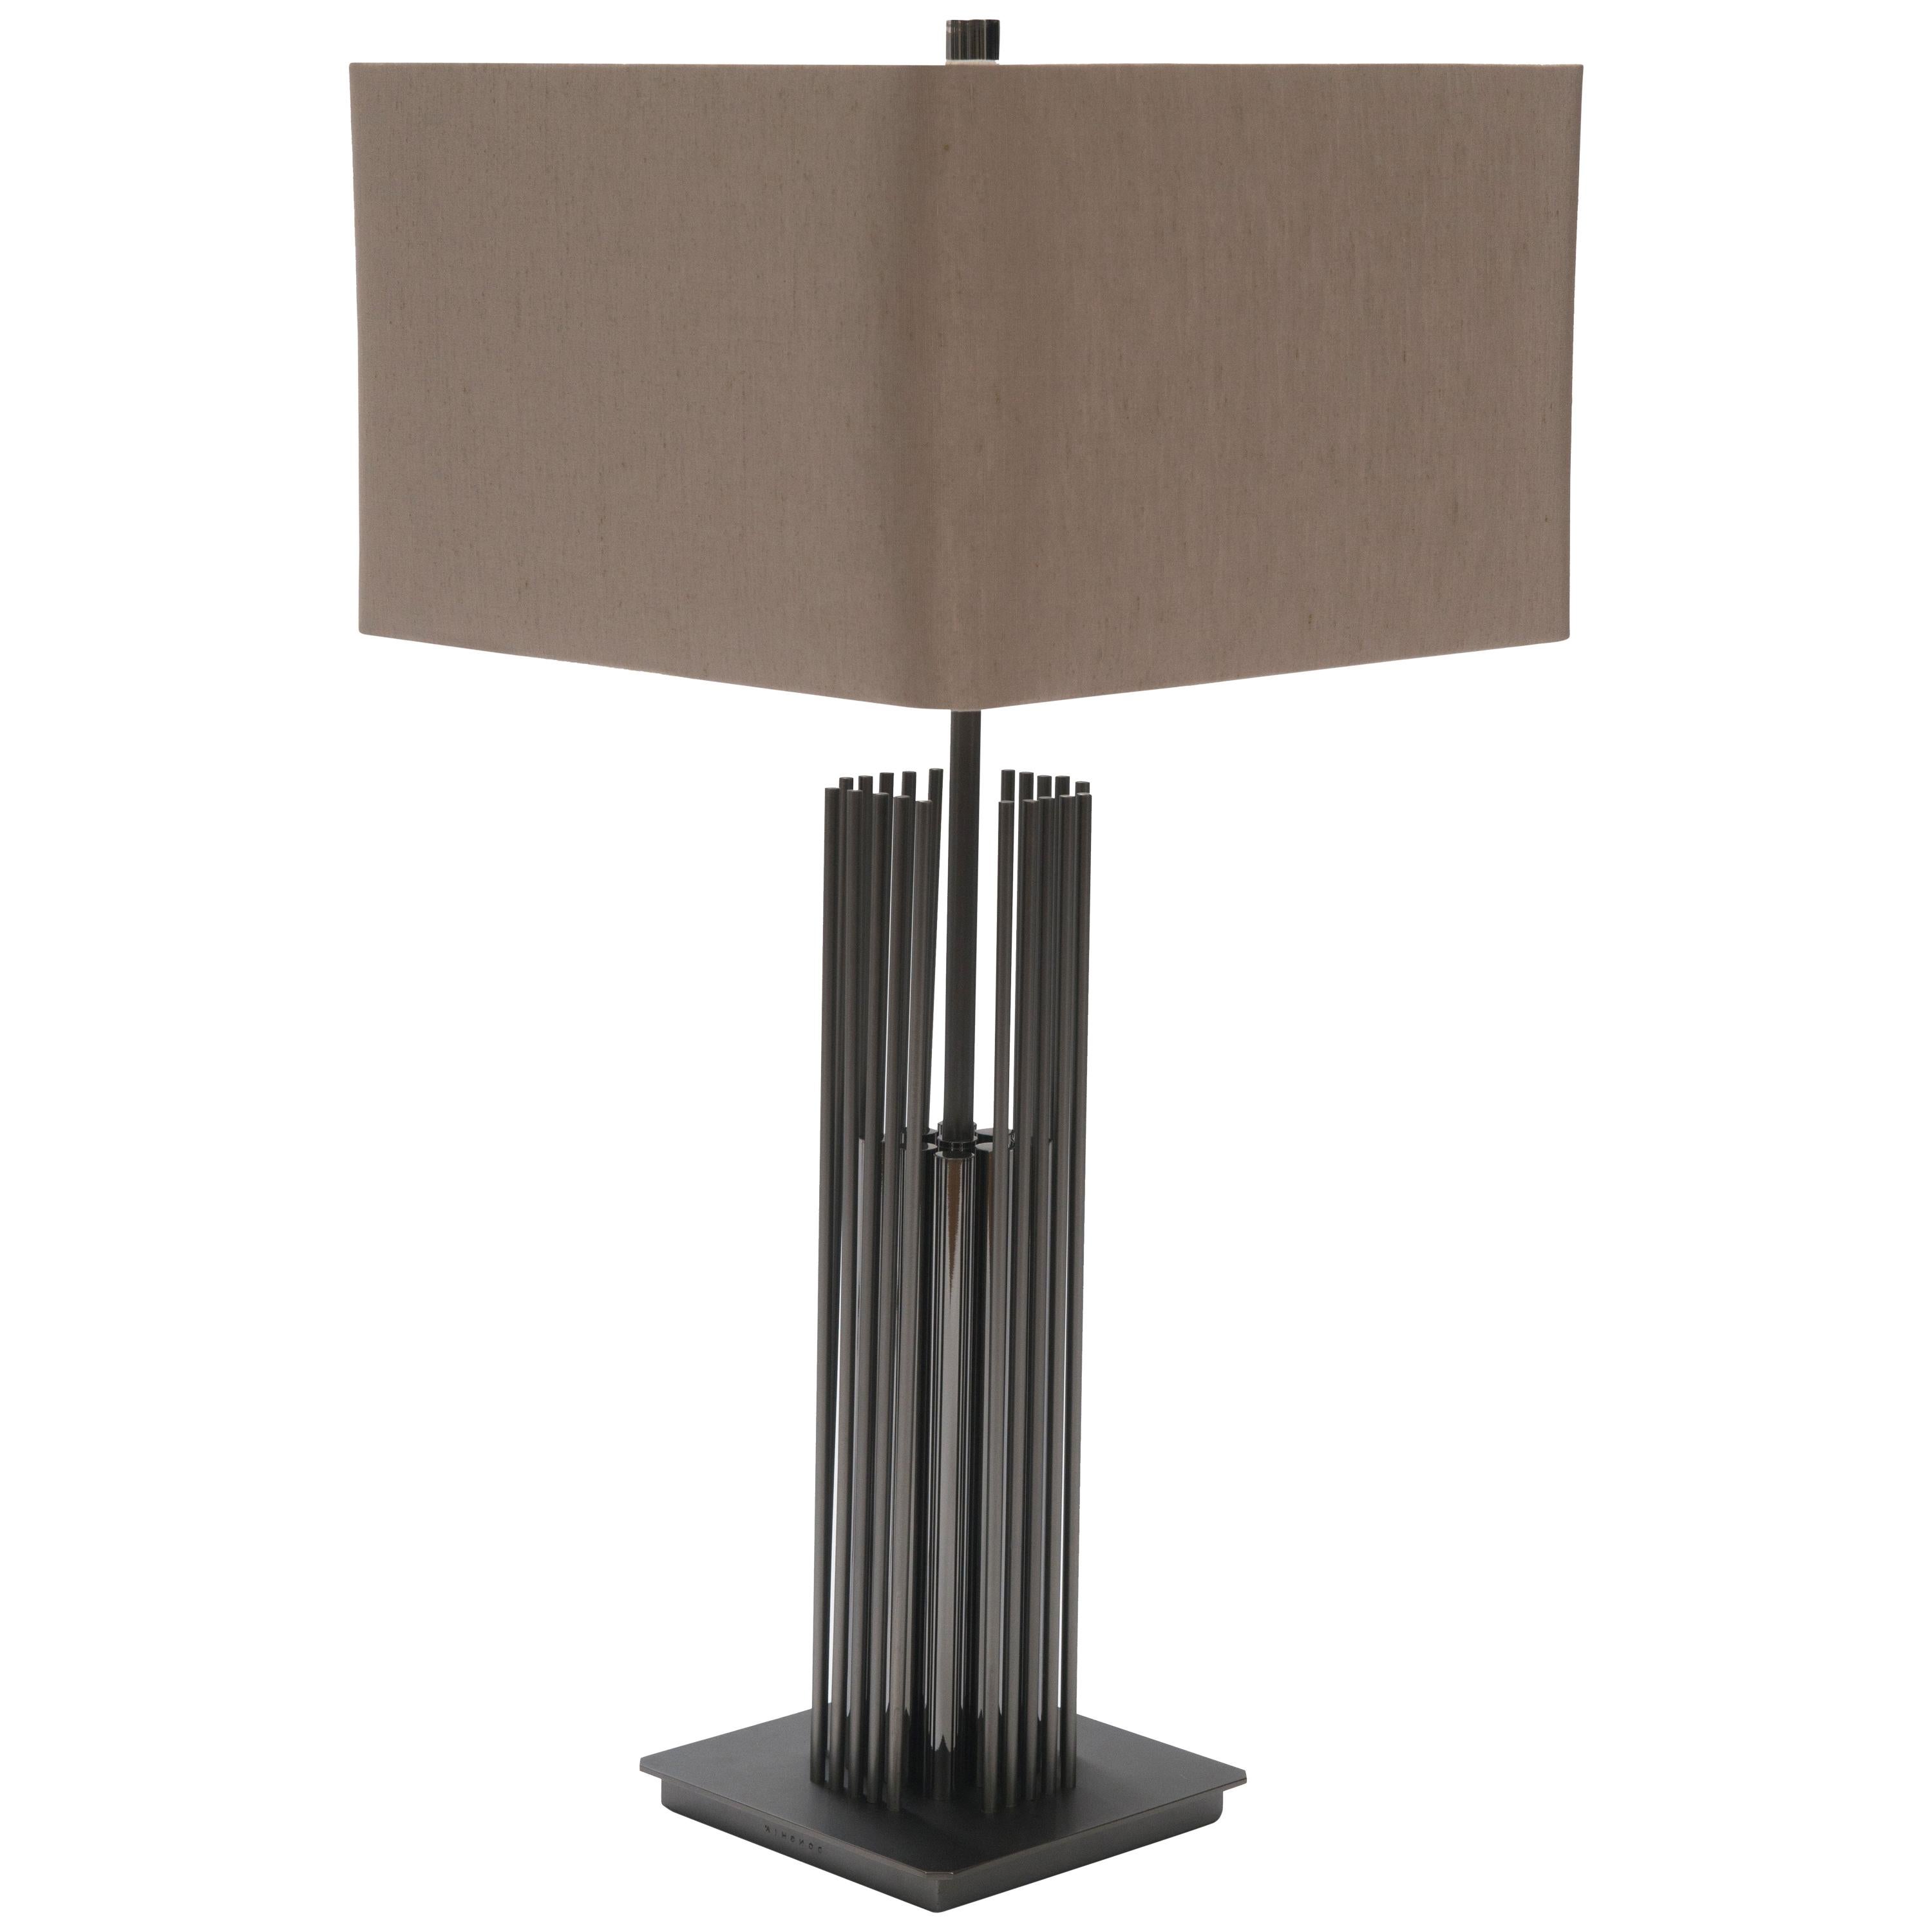 Donghia Stoa Lamp and Shade with Smoked Nickel and Glossy Matte Base For Sale